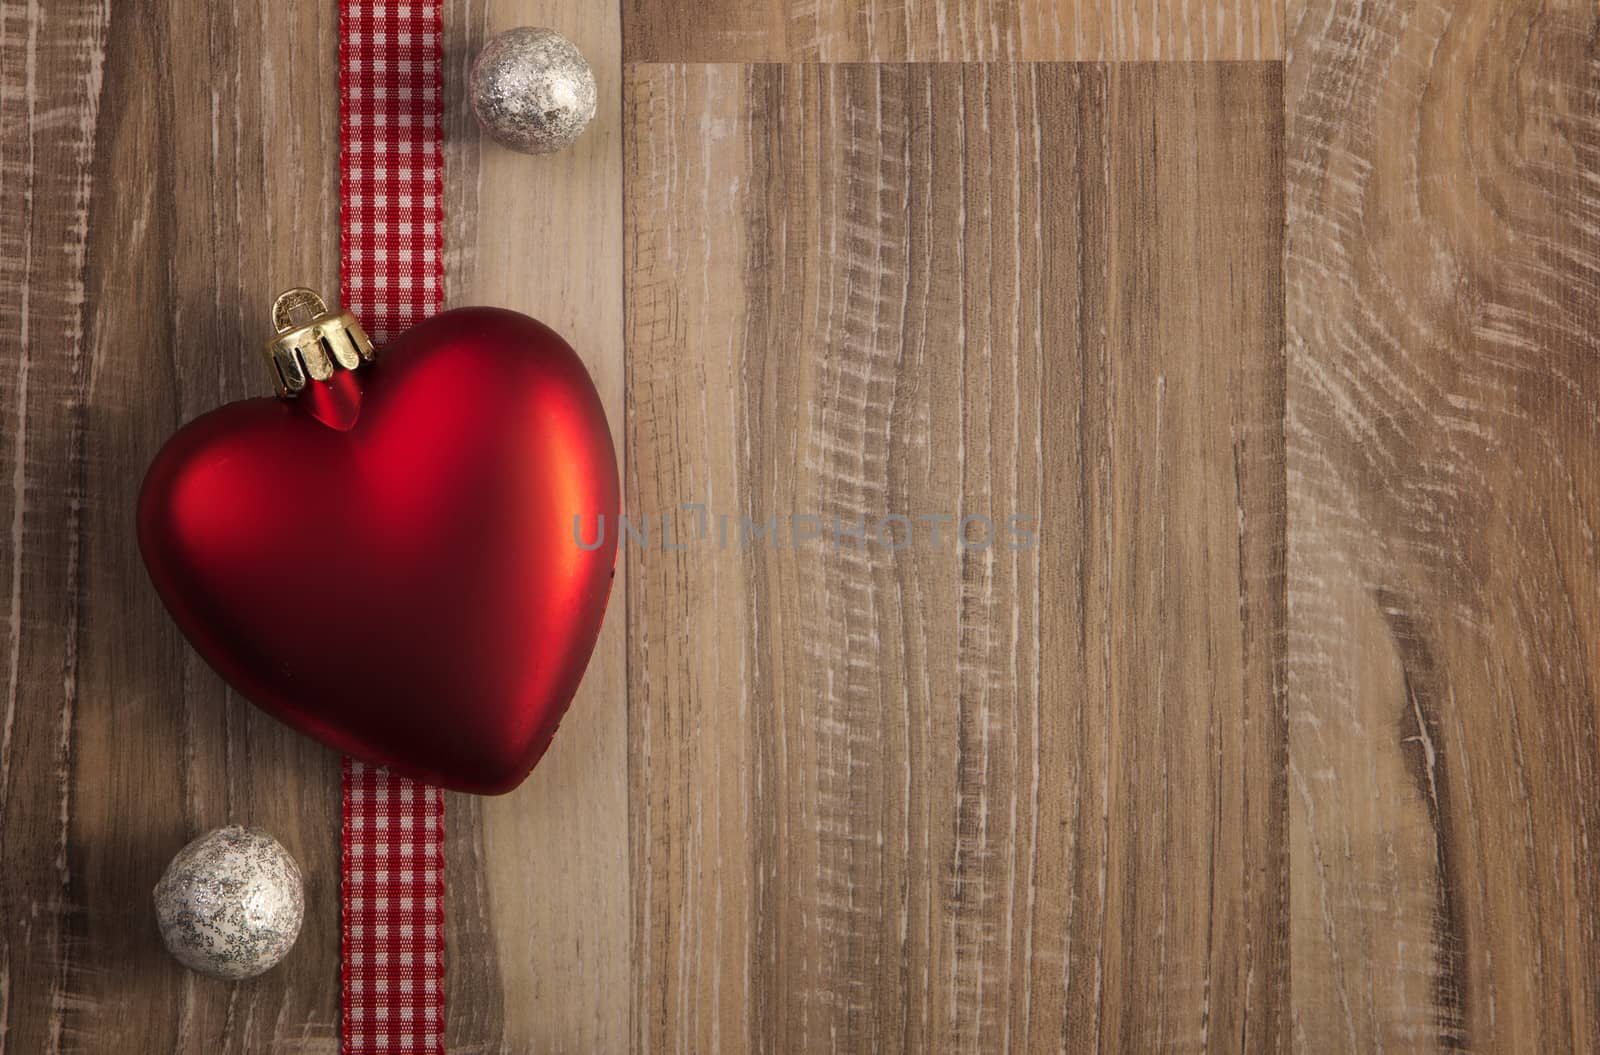 heart as christmas bauble with wooden background 